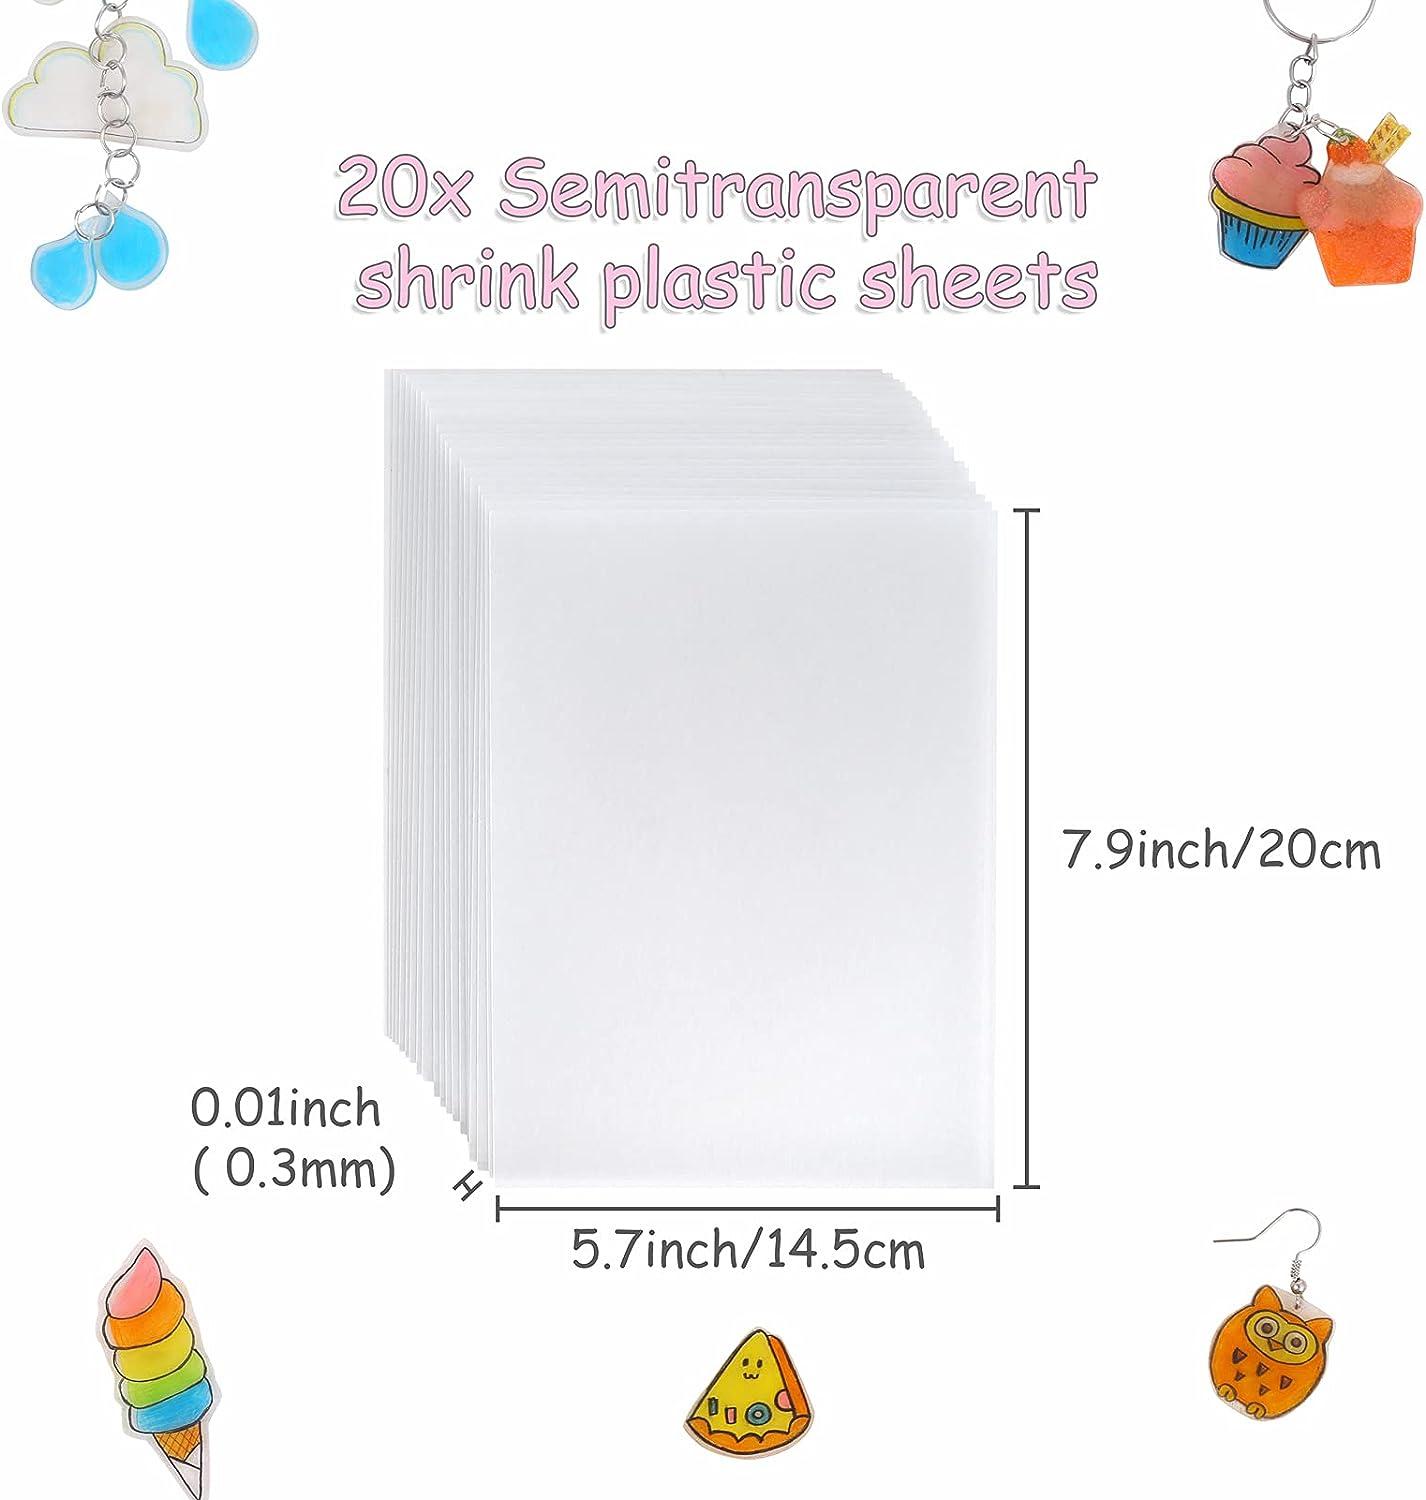 Auihiay 12 Pieces Printable Shrink Plastic Sheets, Shrink Films Papers for Kids Creative Craft, 6 White and 6 Semitransparent, 8.3 x 11.6 inch / 21